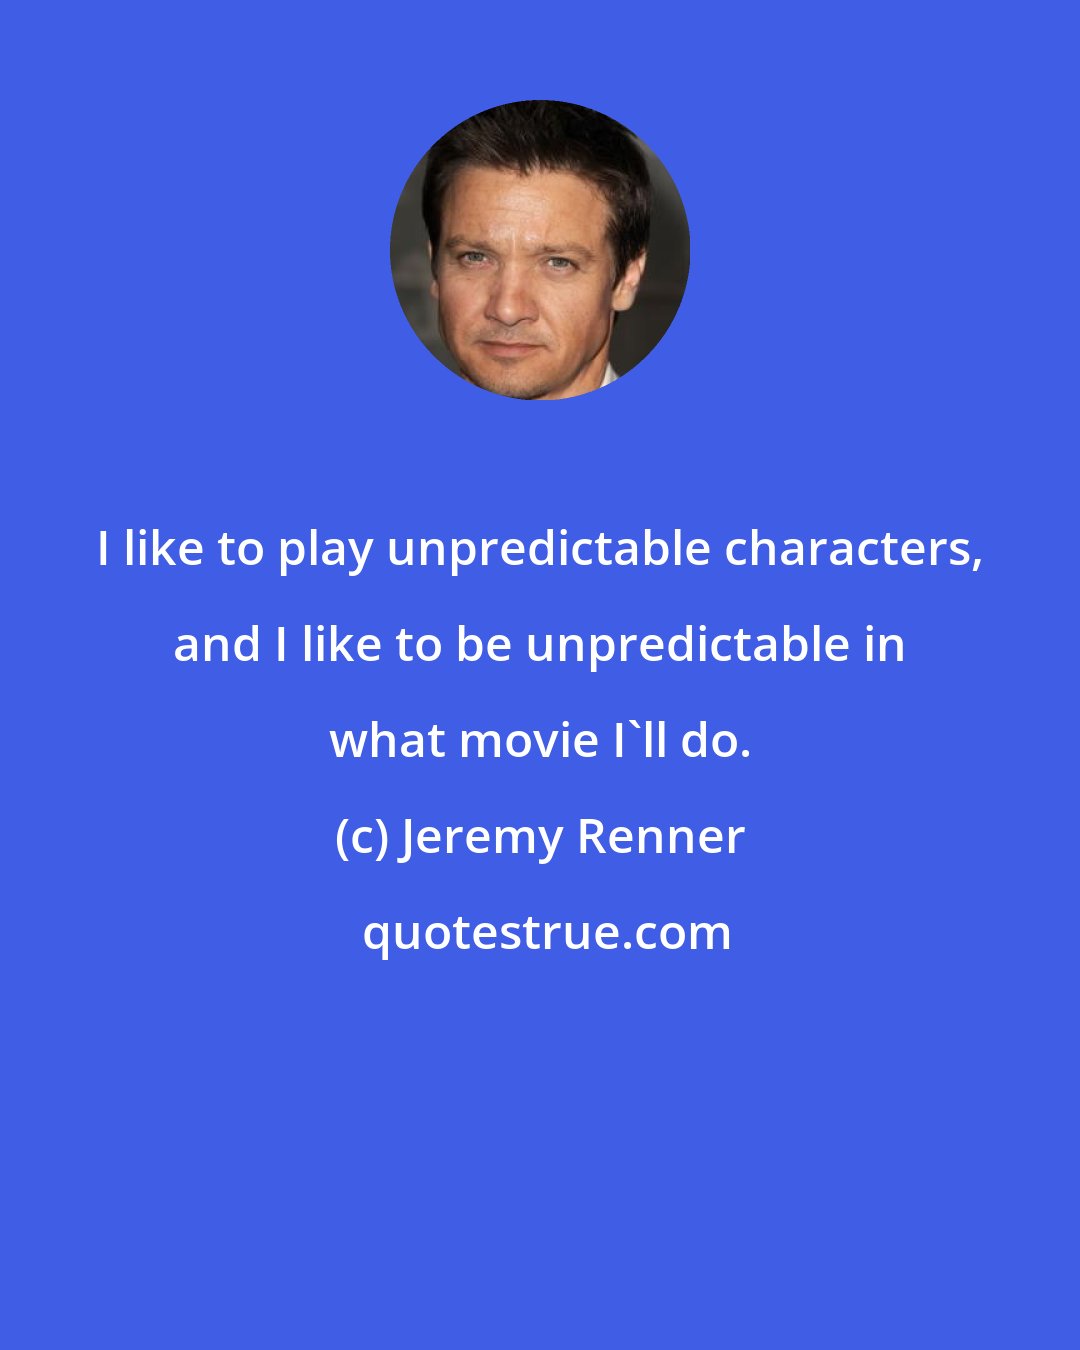 Jeremy Renner: I like to play unpredictable characters, and I like to be unpredictable in what movie I'll do.